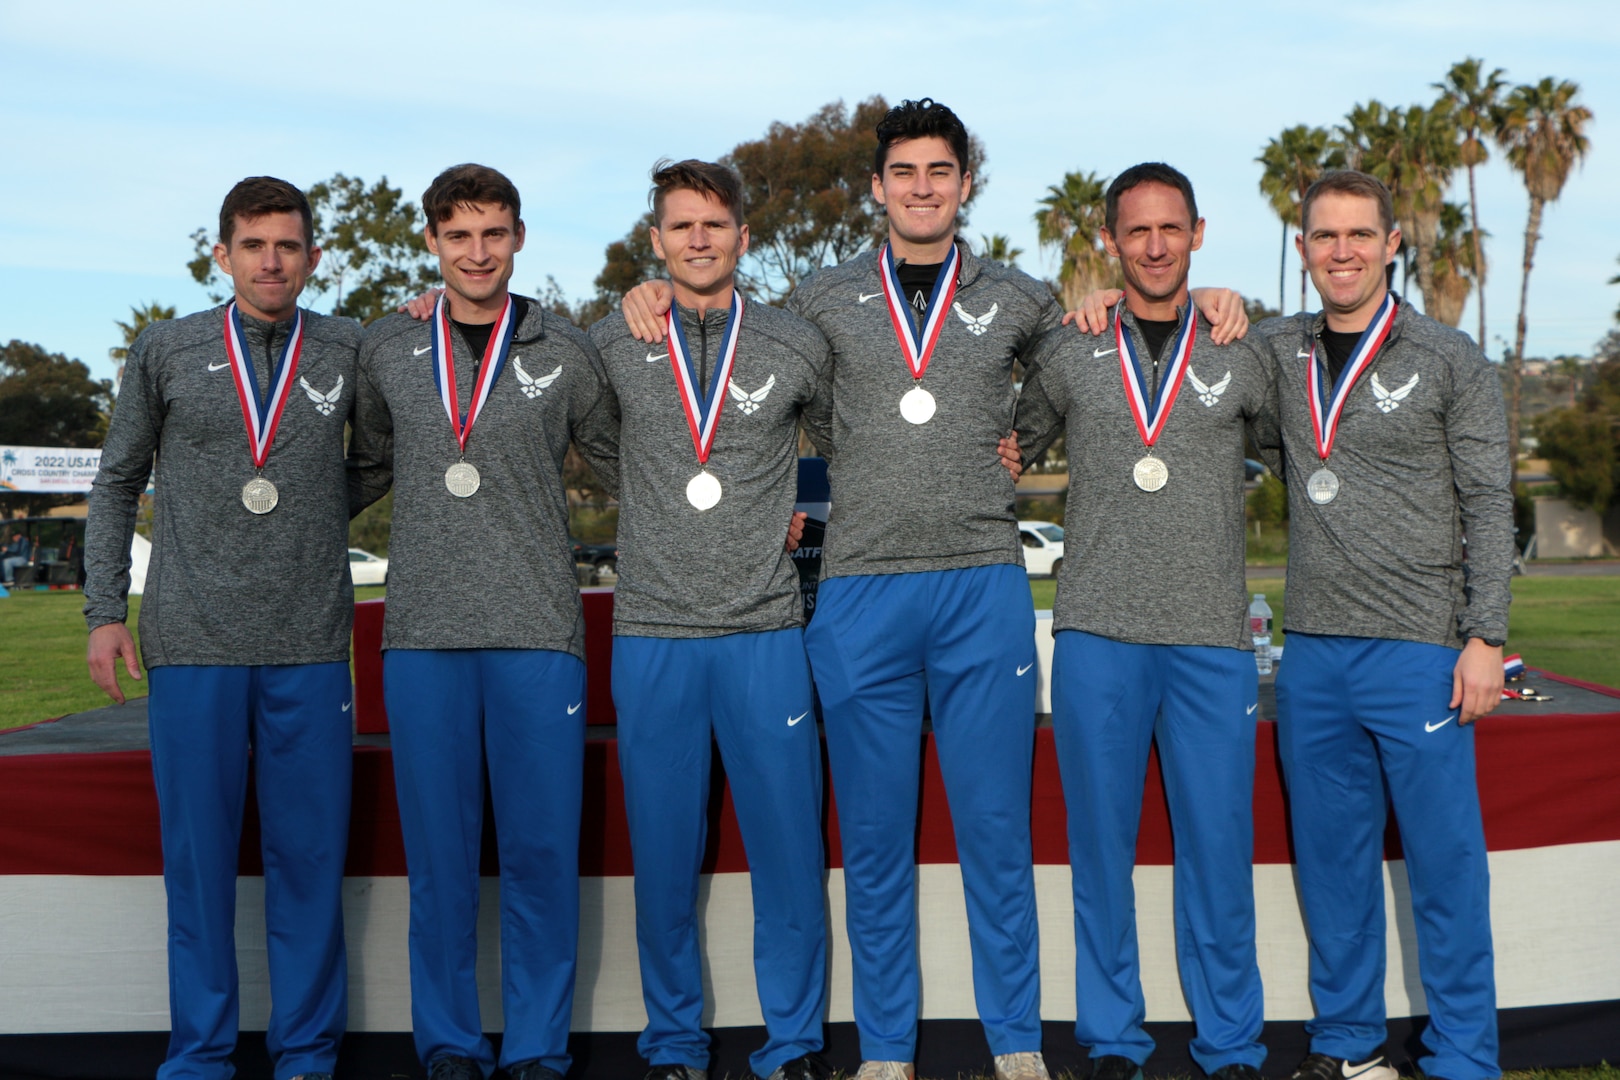 Air Force Men capture team silver during the 2022 Armed Forces Cross Country Championship held in conjunction with the USA Track and Field National Cross Country Championship at Mission Bay Park in San Diego, Calif. on January 8th.  Runners from the Marine Corps, Navy (with Coast Guard) and Air Force compete for gold.  (Department of Defense Photo - Released)